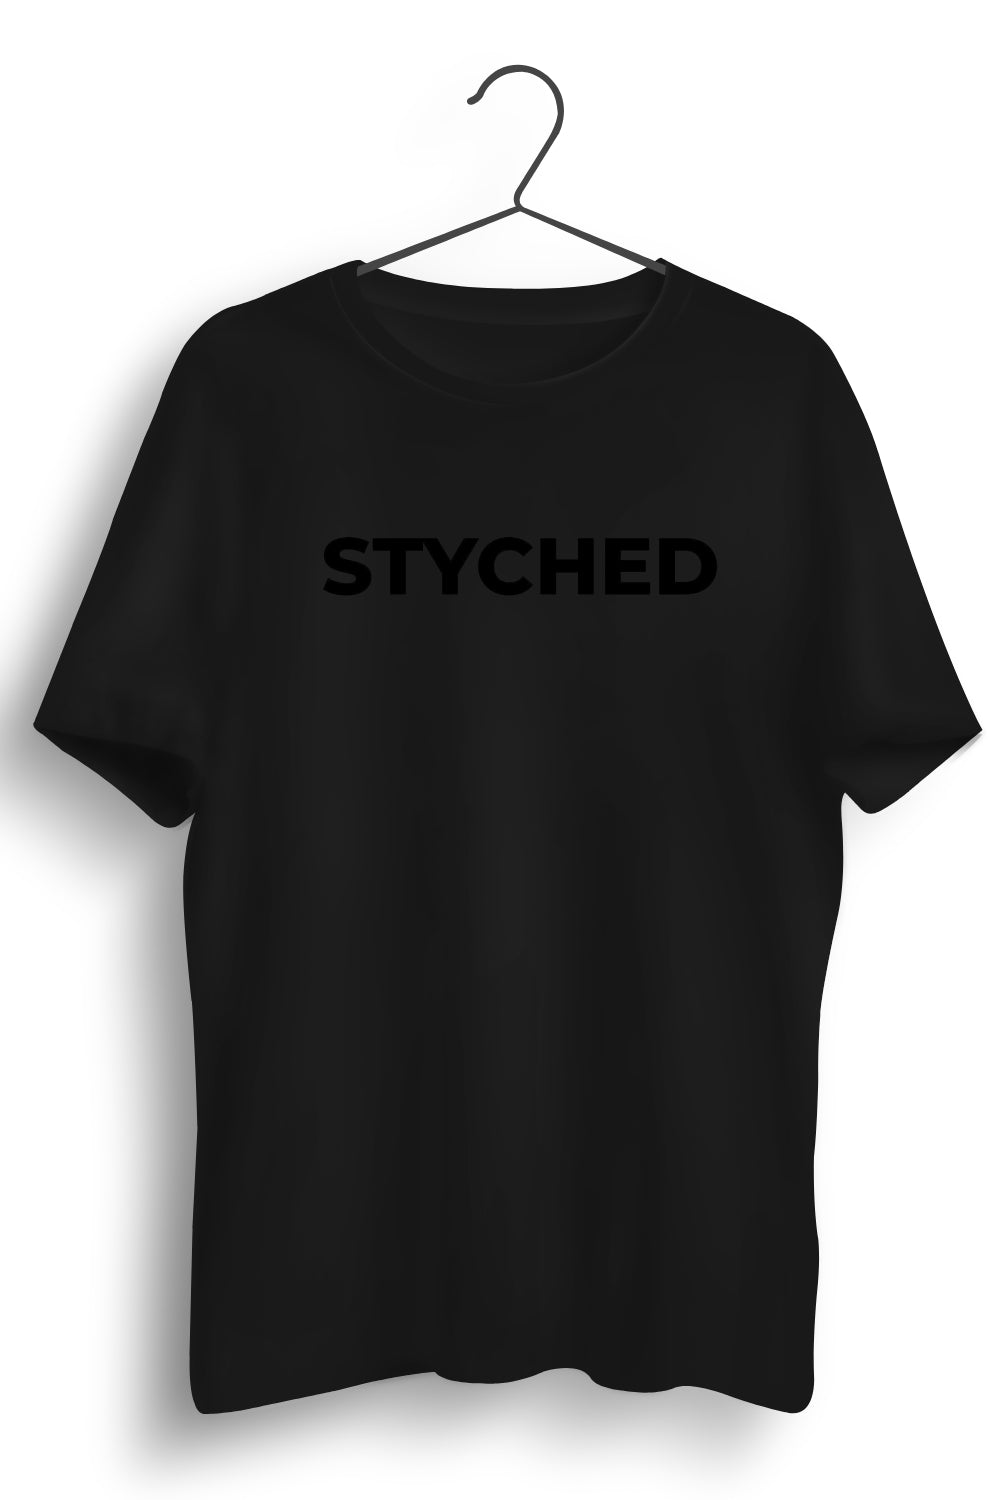 Styched Font All Black Tshirt